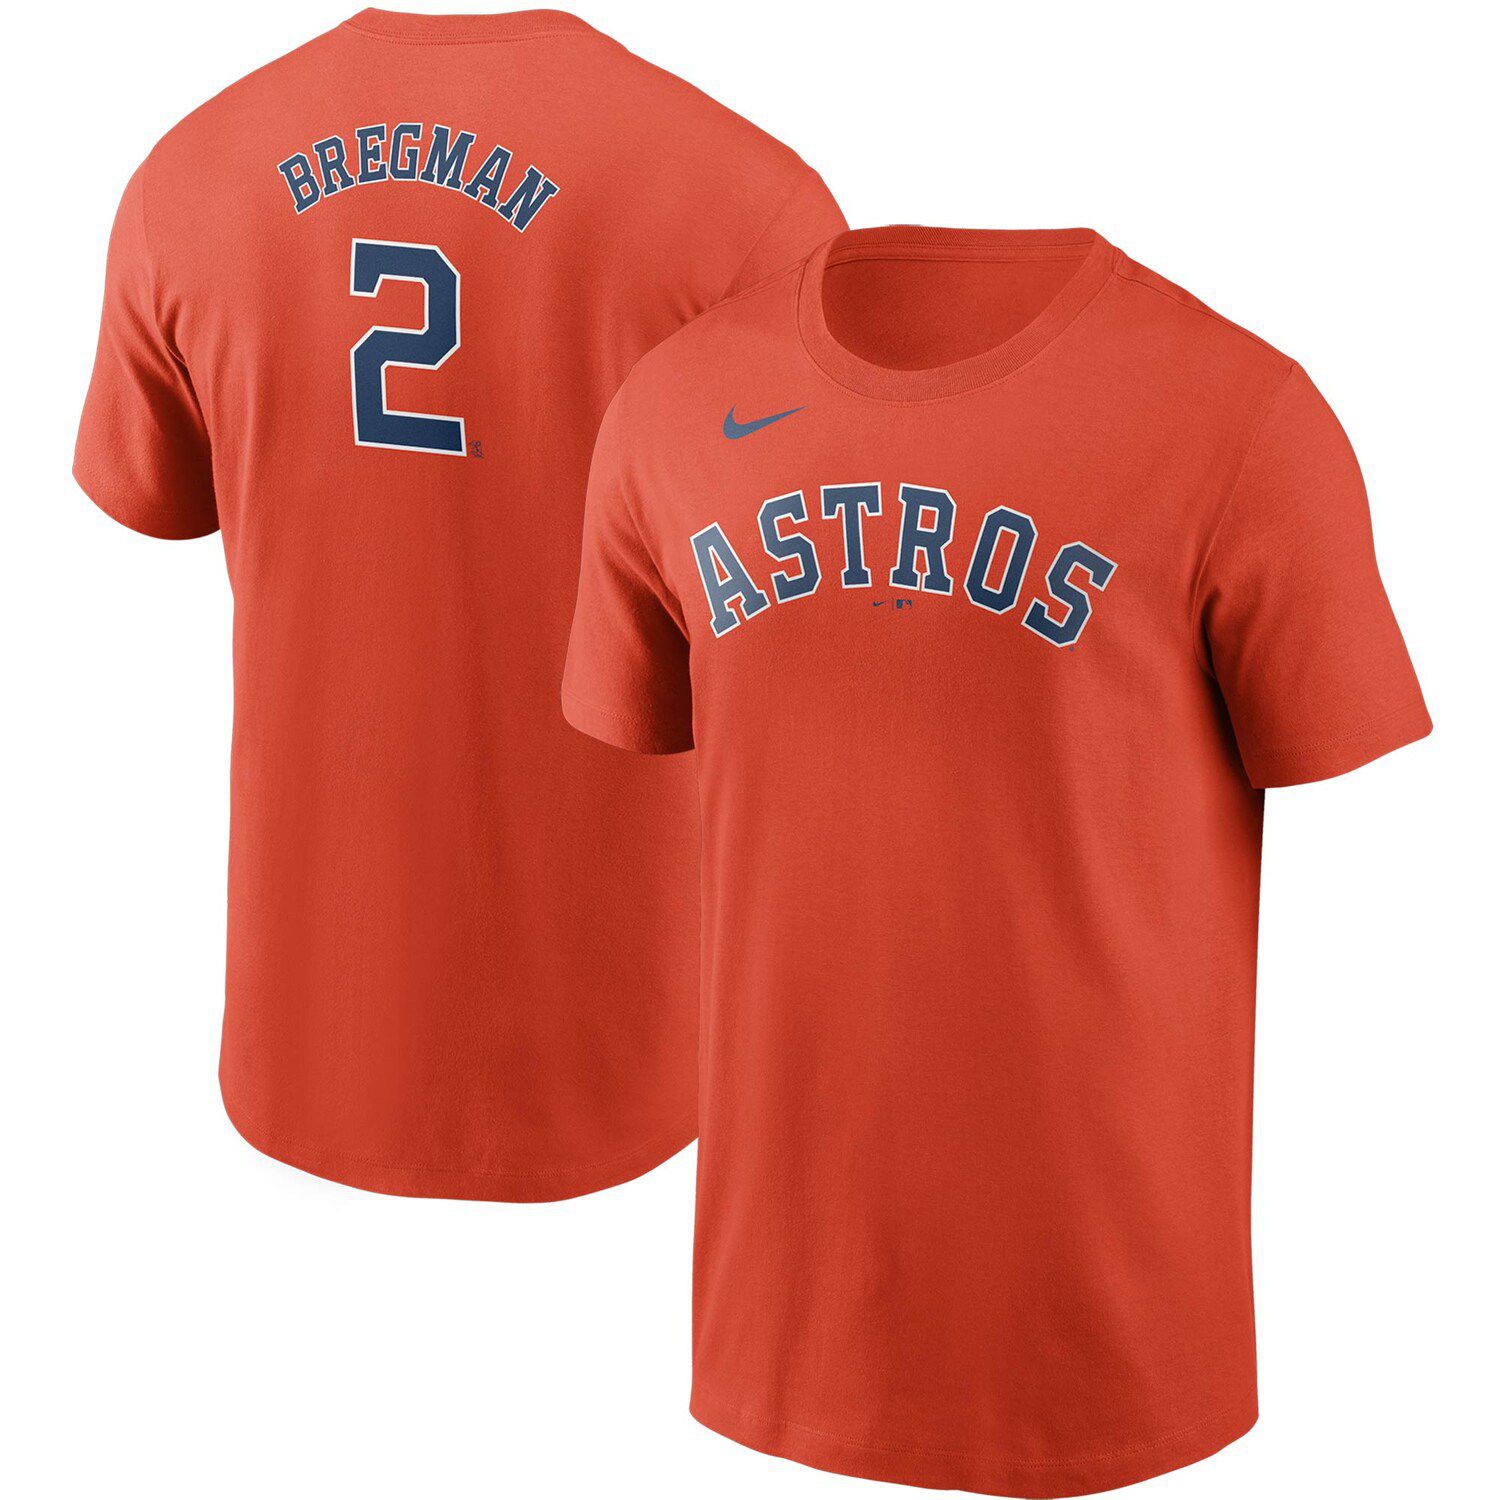 Houston Astros Pro Standard Cooperstown Collection Retro Classic T